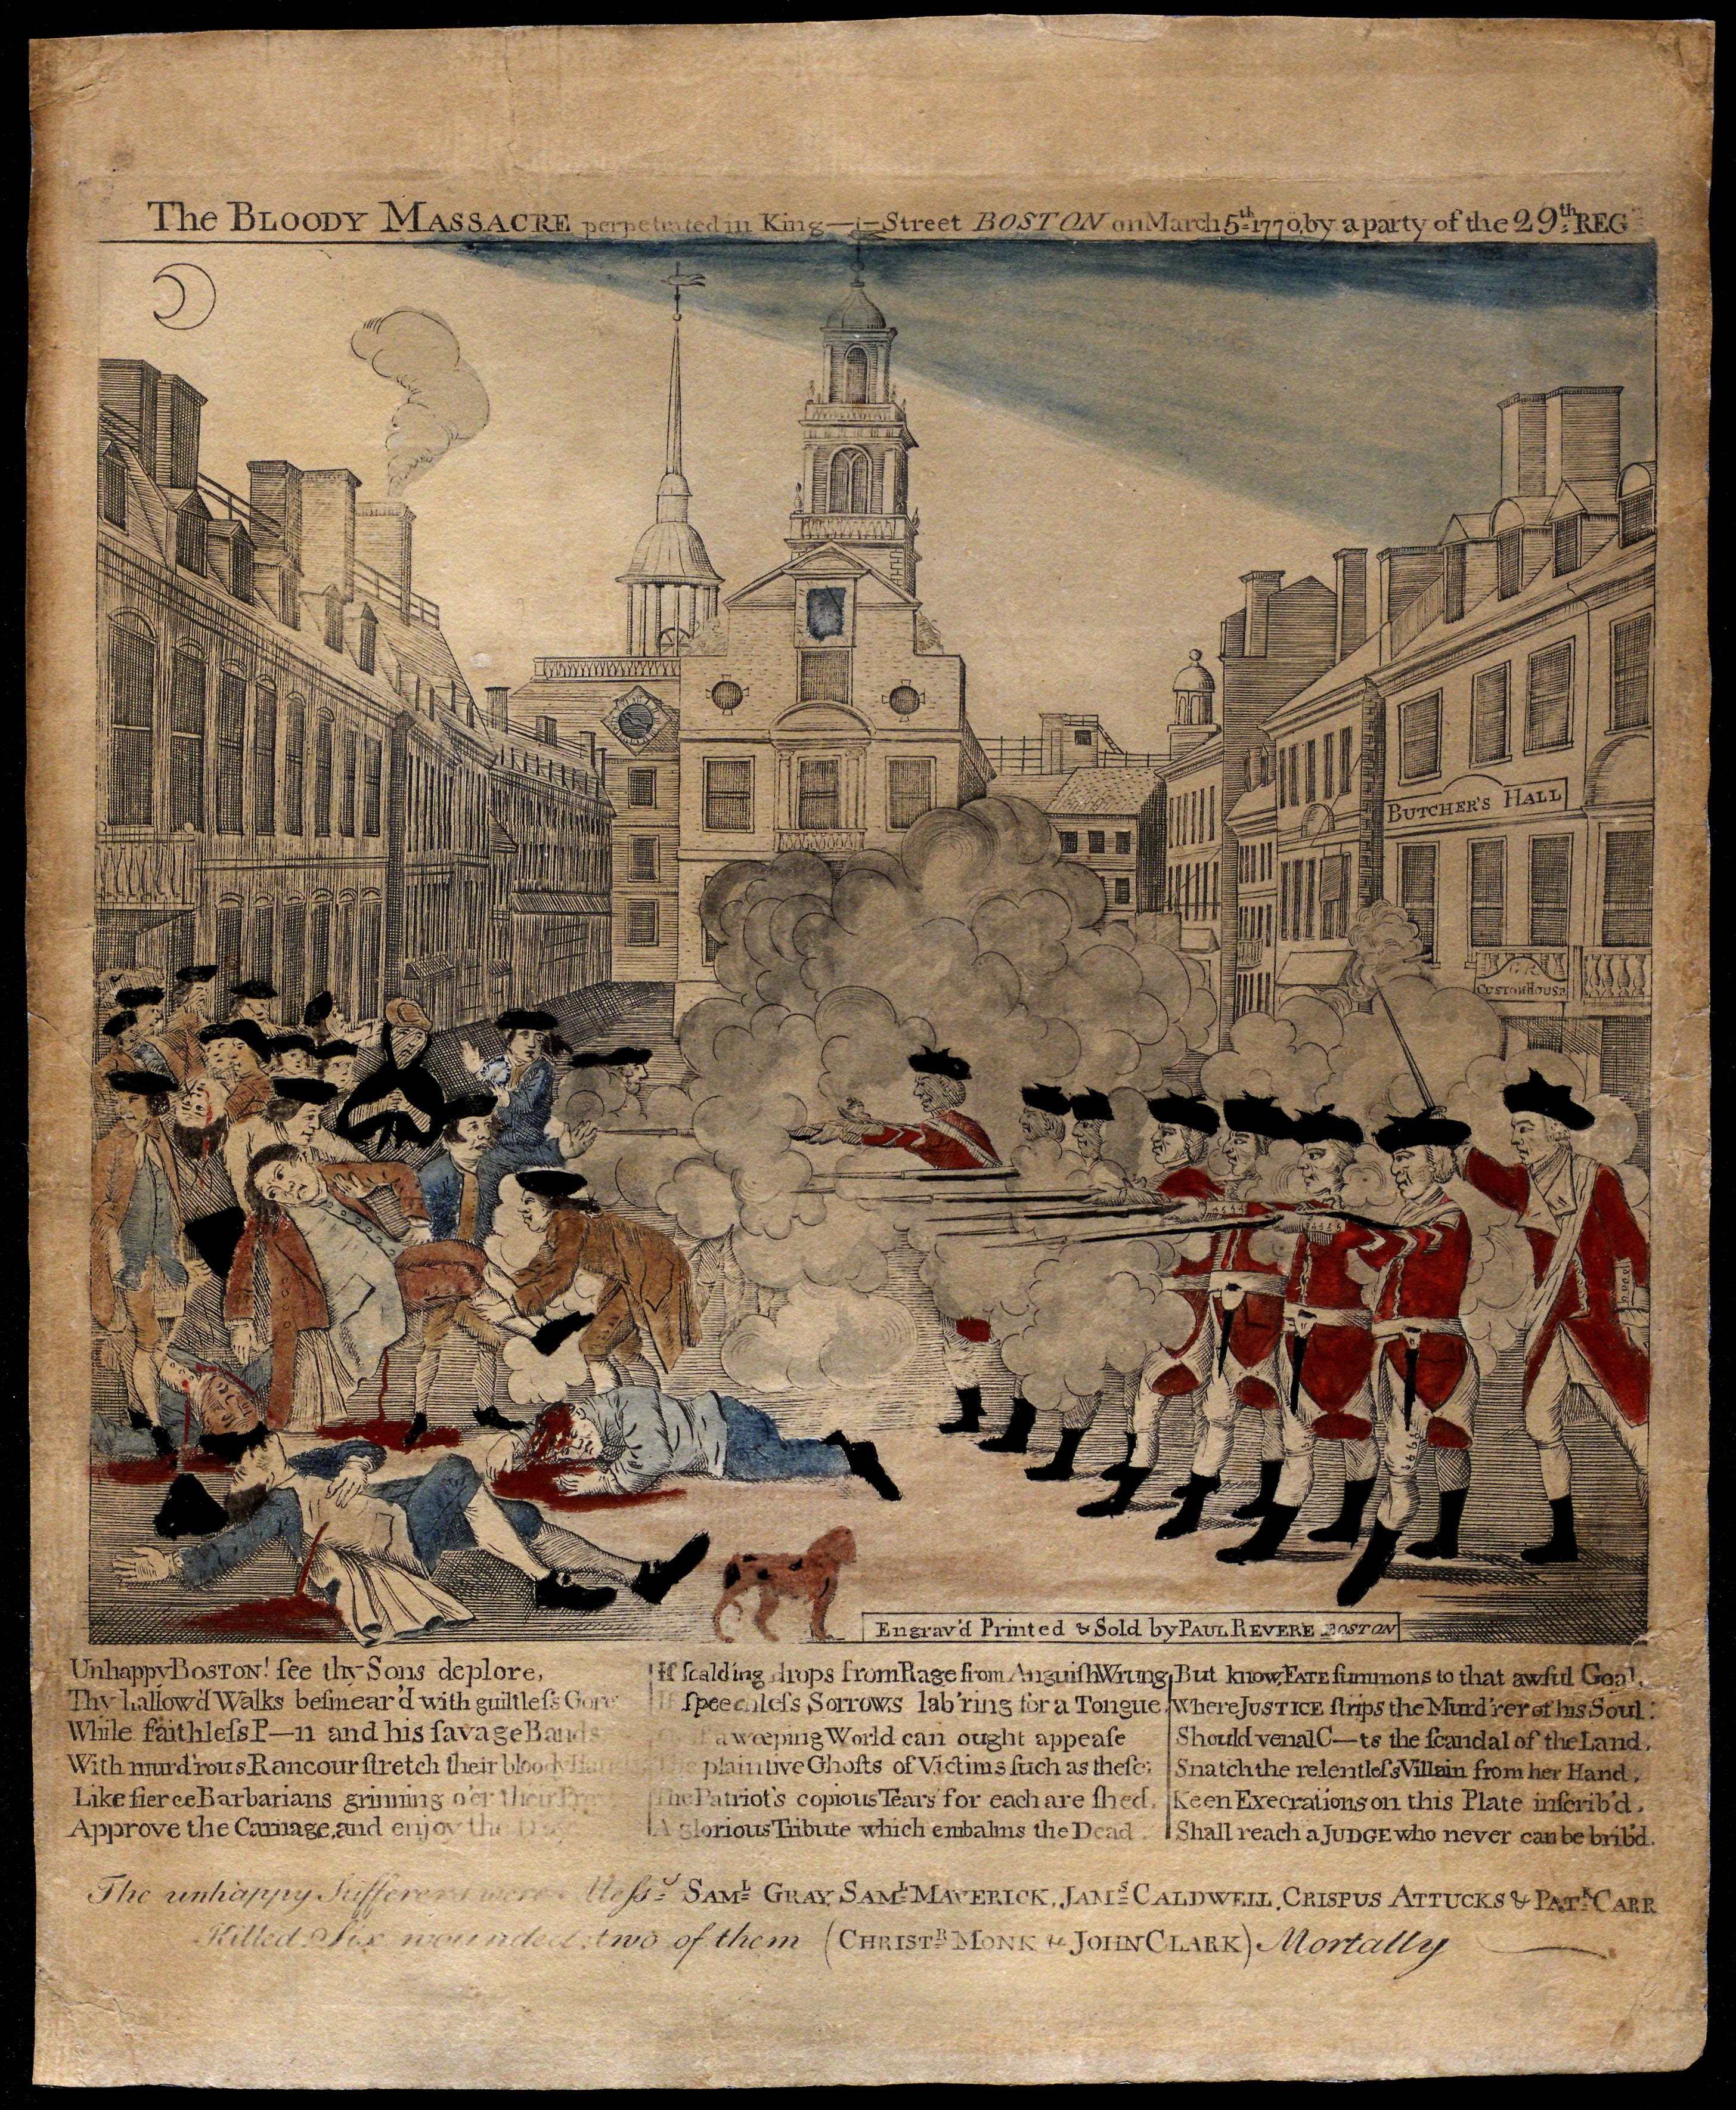 Print depicting the Boston Massacre, engraved by Paul Revere in 1770. This image was meant to inspire anger toward the British soldiers, who are seen here firing upon the helpless American colonists. (The Gilder Lehrman Institute, GLC01868)